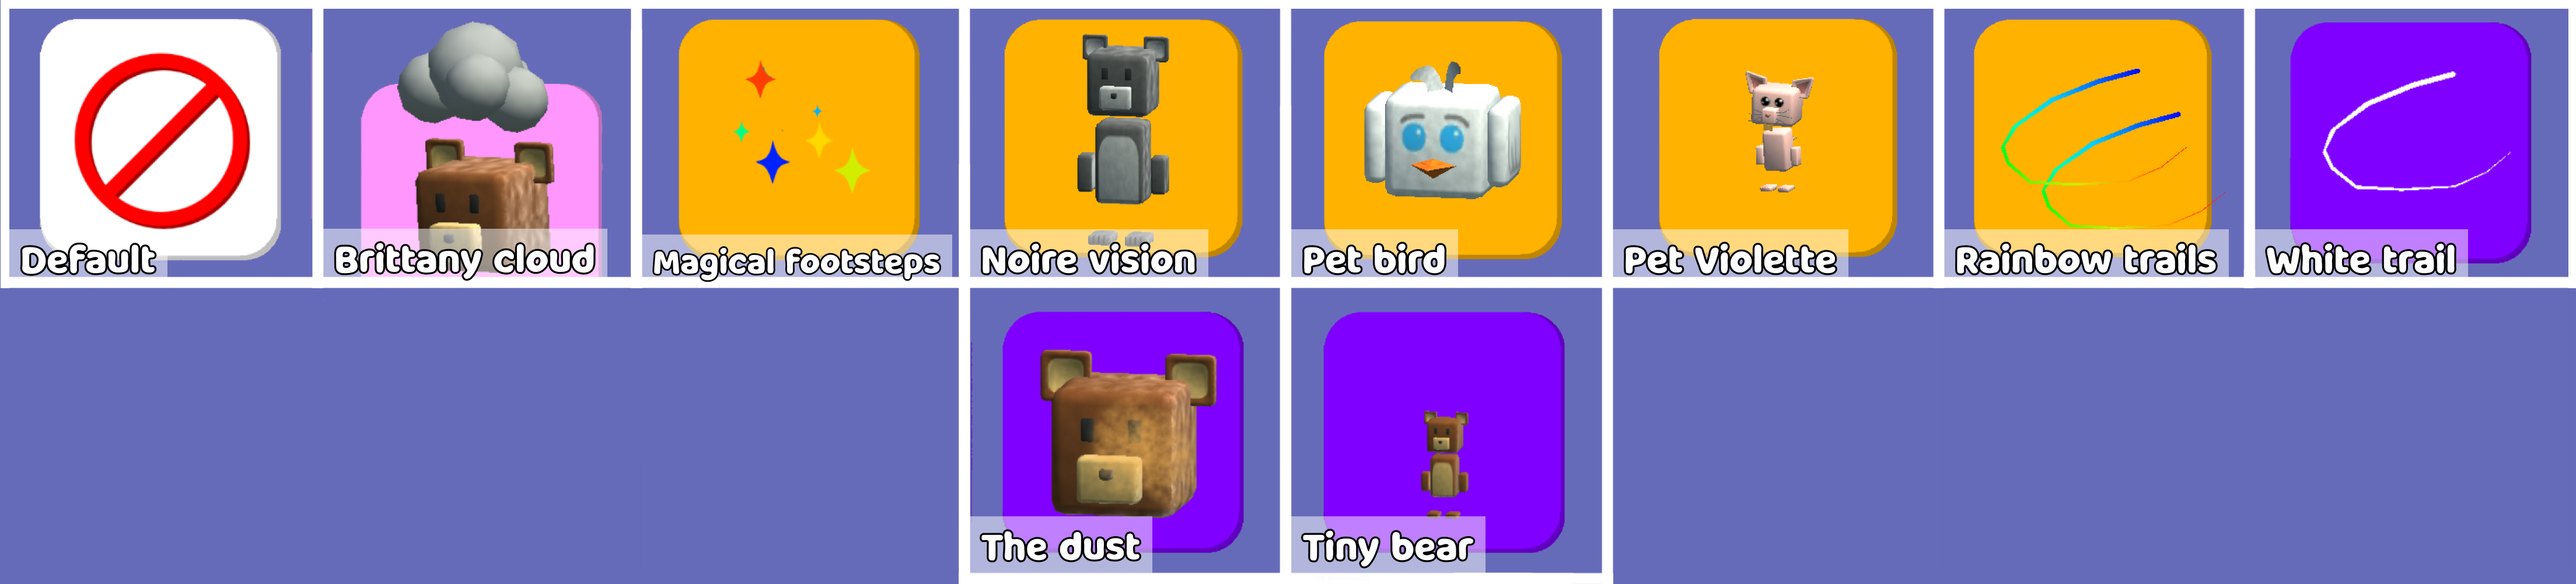 Obtaining The New GHOST TRAIL In Super Bear Adventure! 